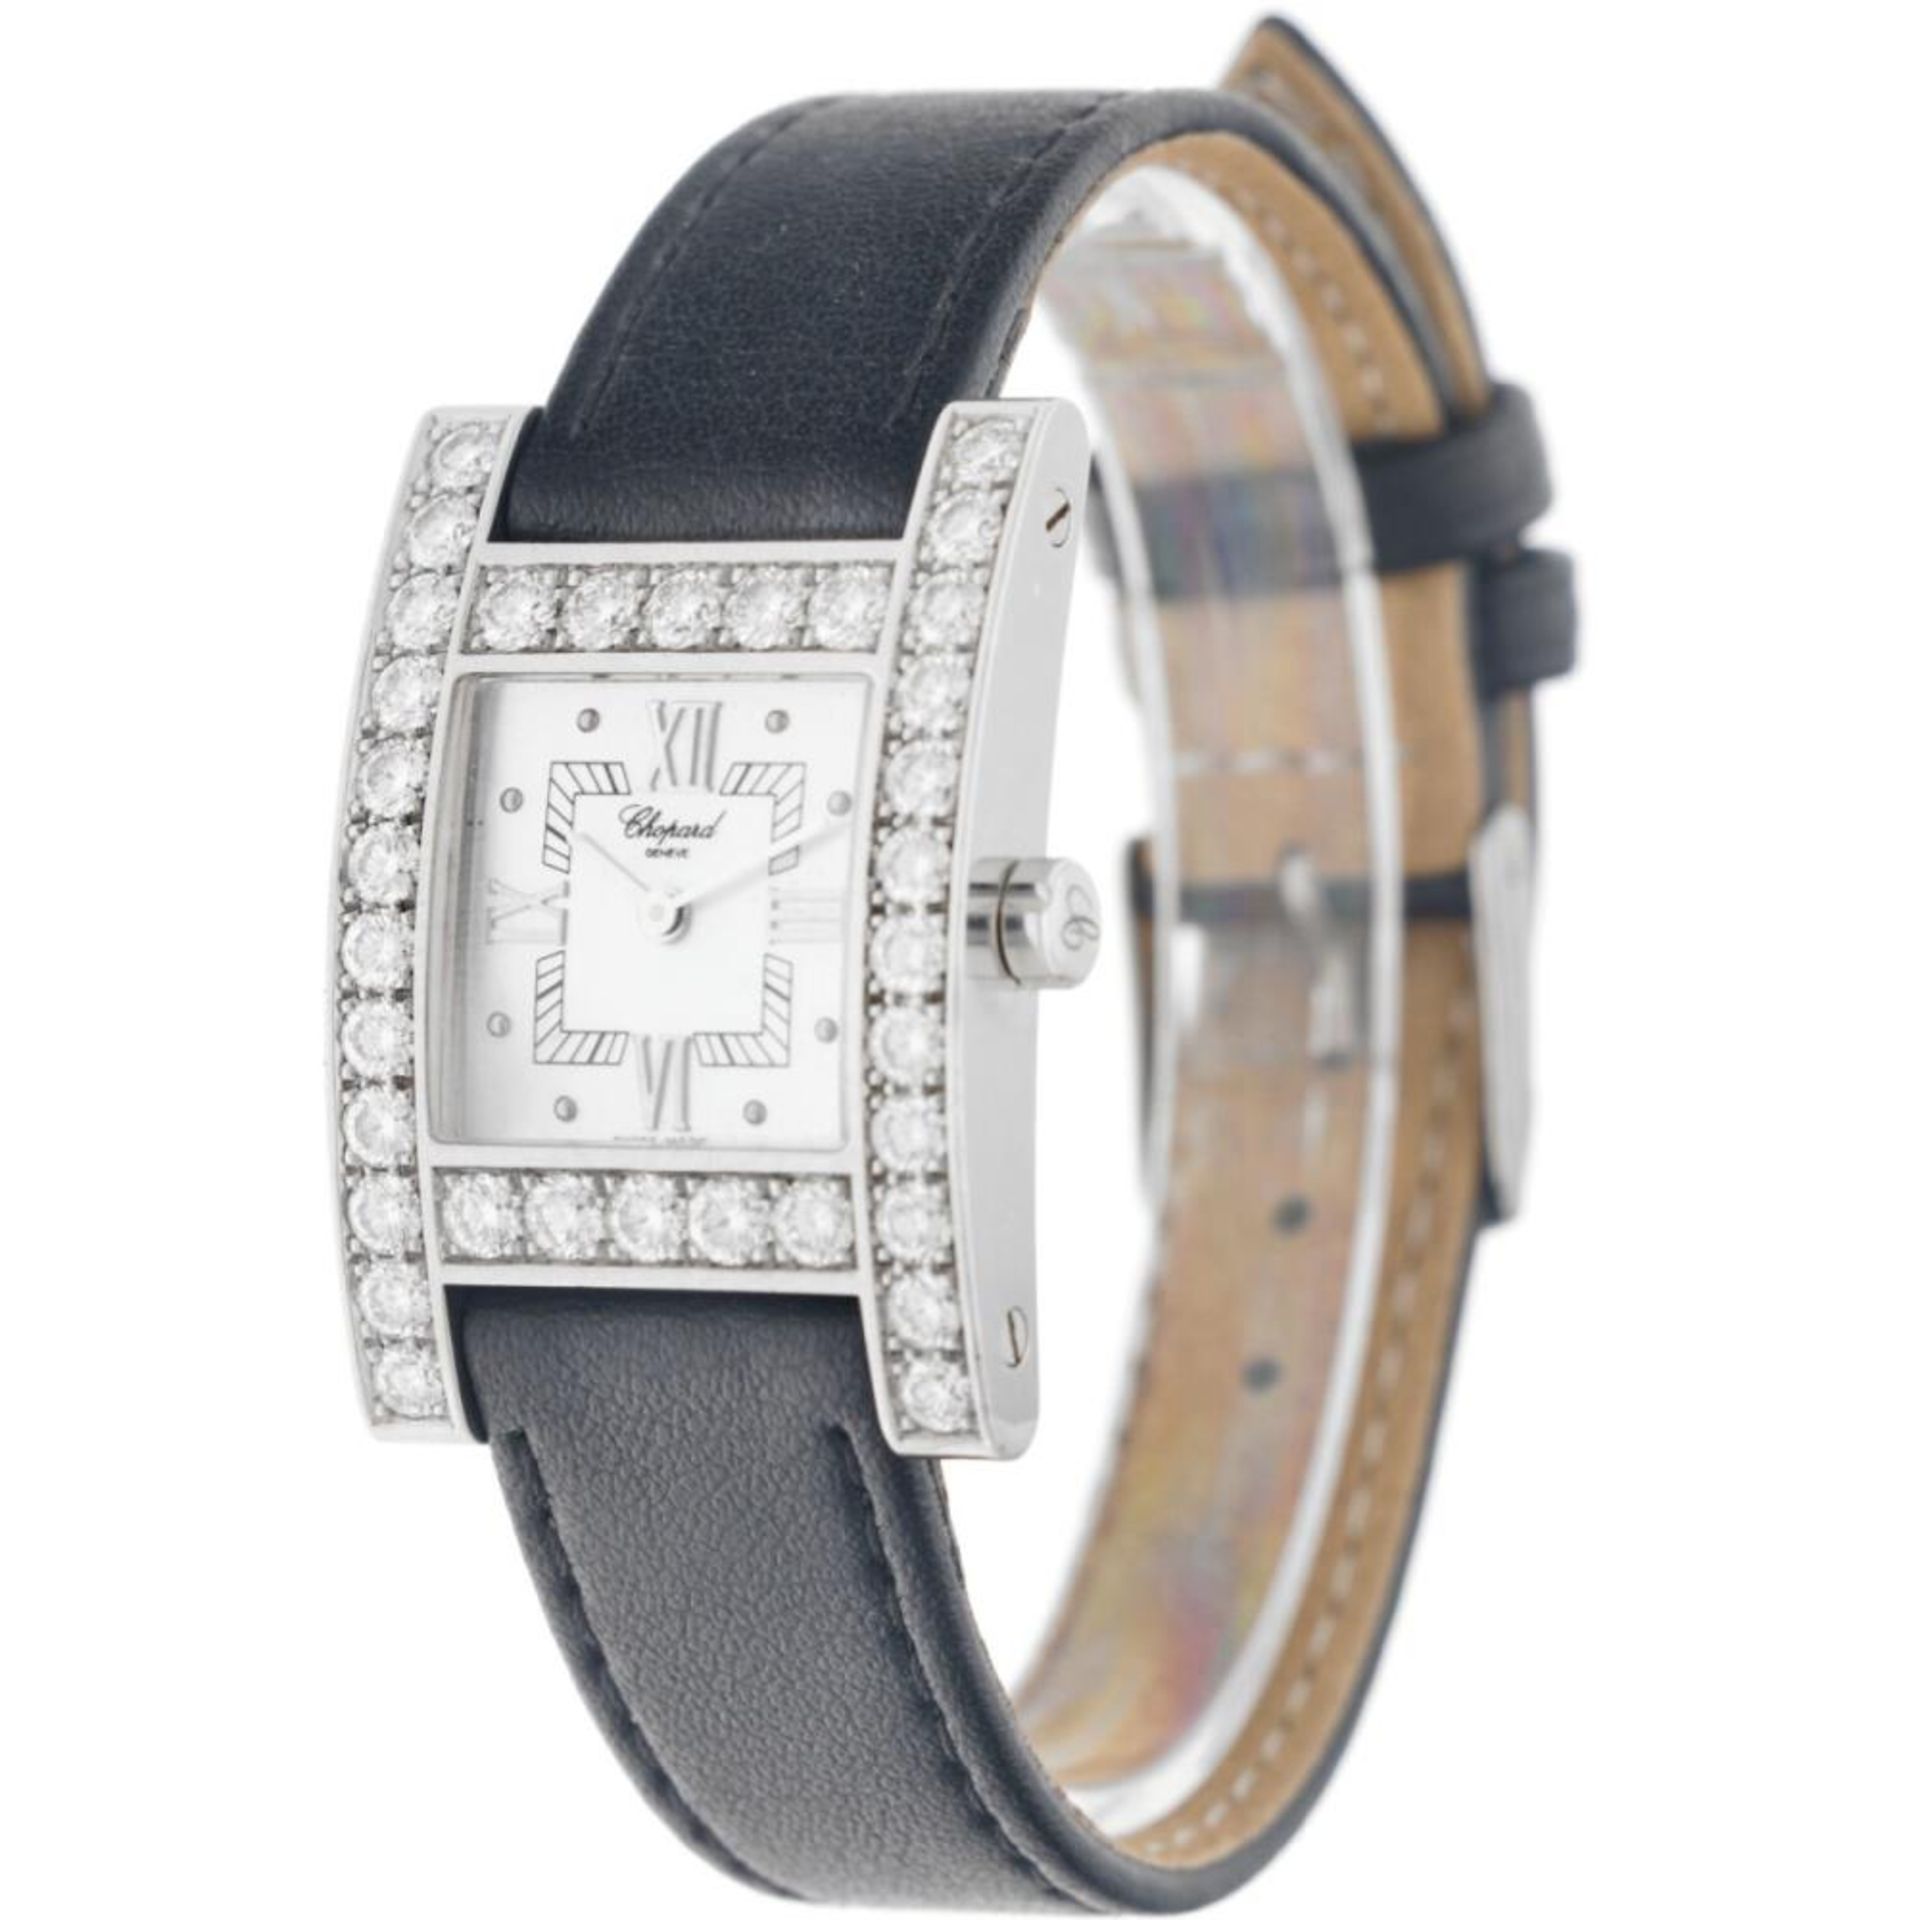 Chopard Your Hour 10/6805 - Ladies watch - ca. 2000 - Image 2 of 6